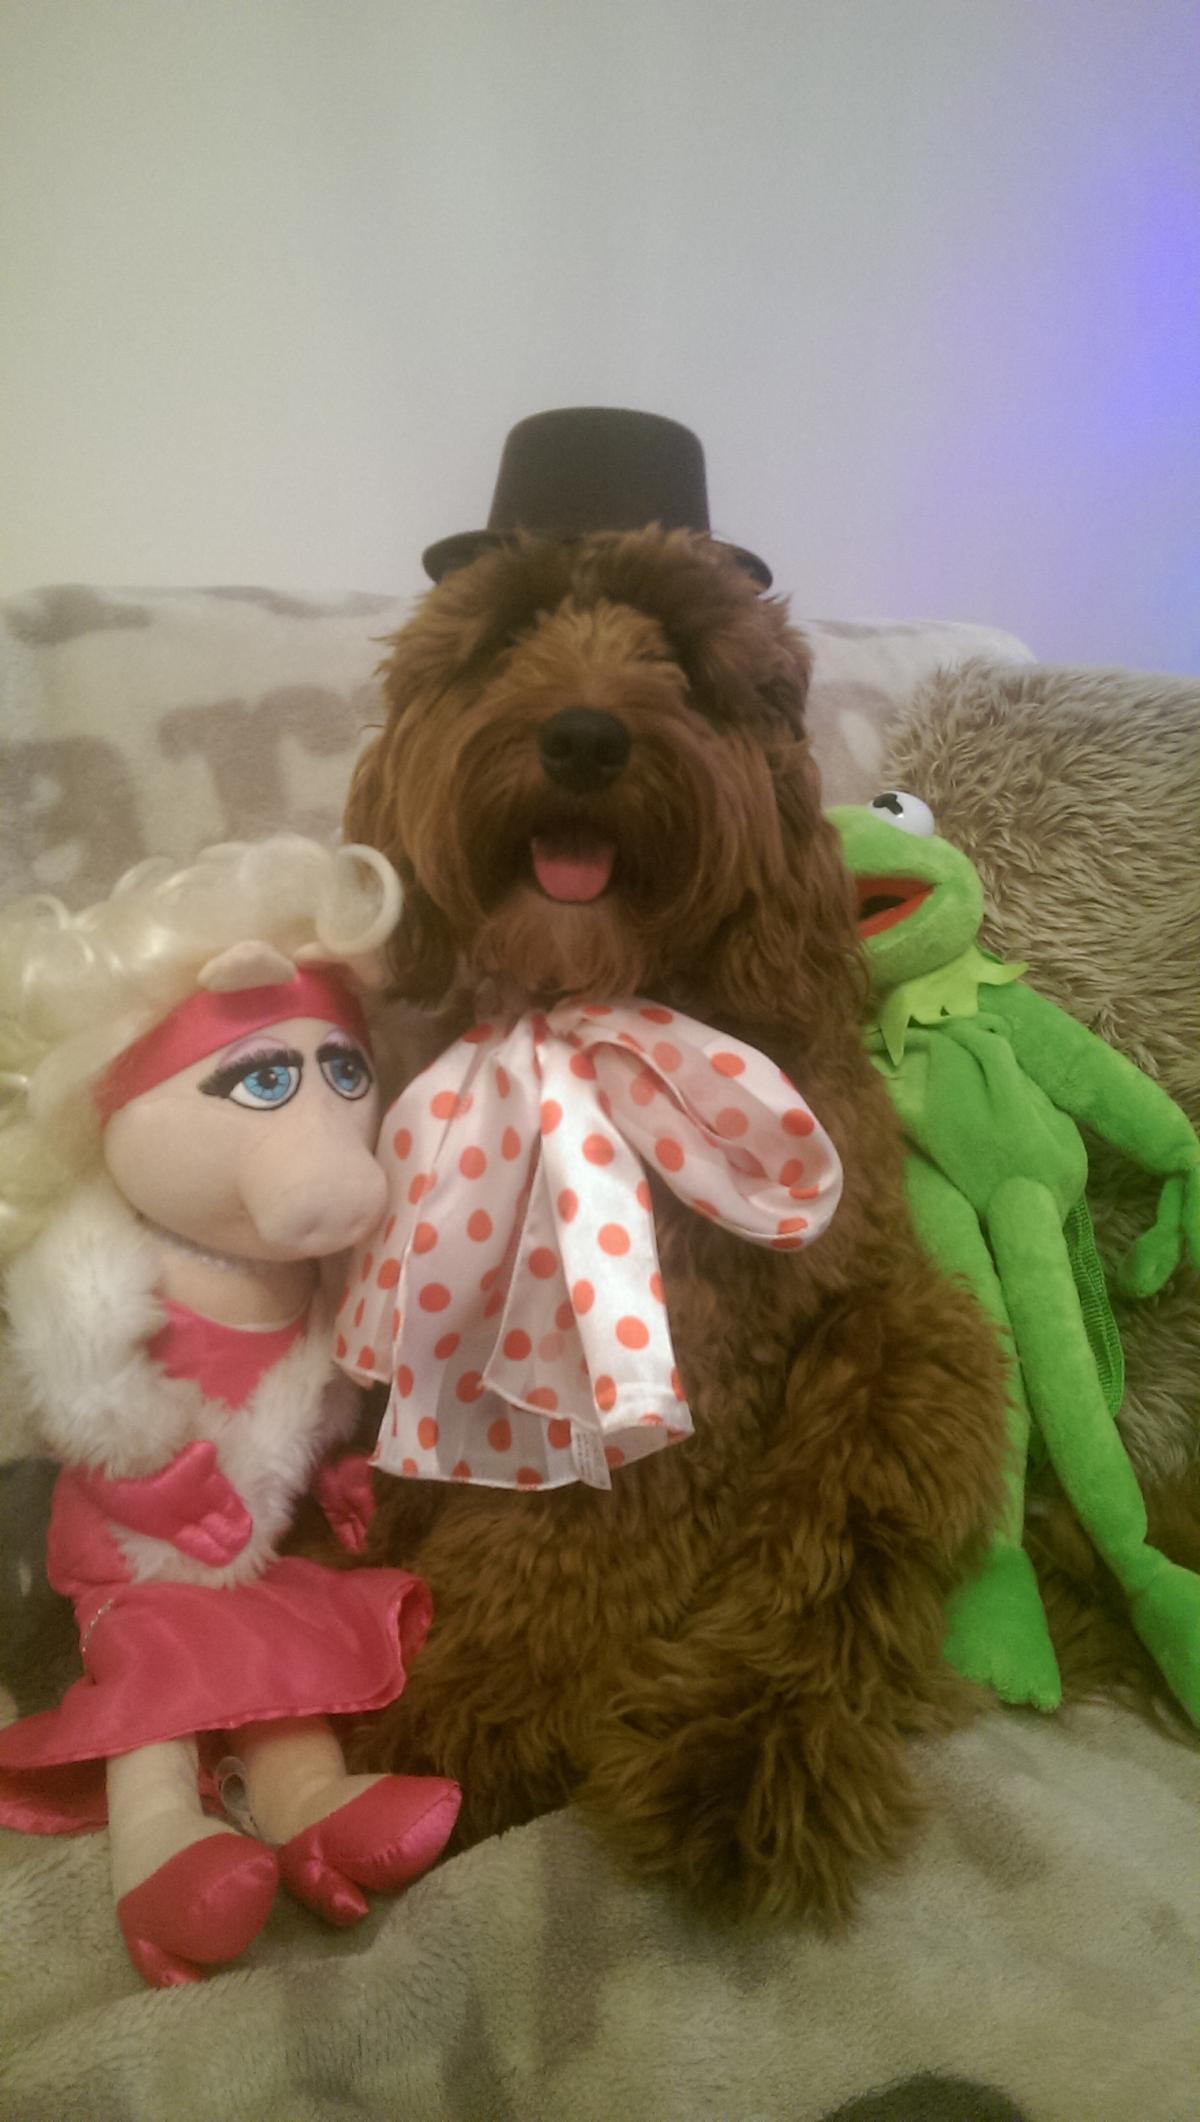 Fozzie Bear lookalike Ridley the dog hangs with his Kermit and Miss Piggy